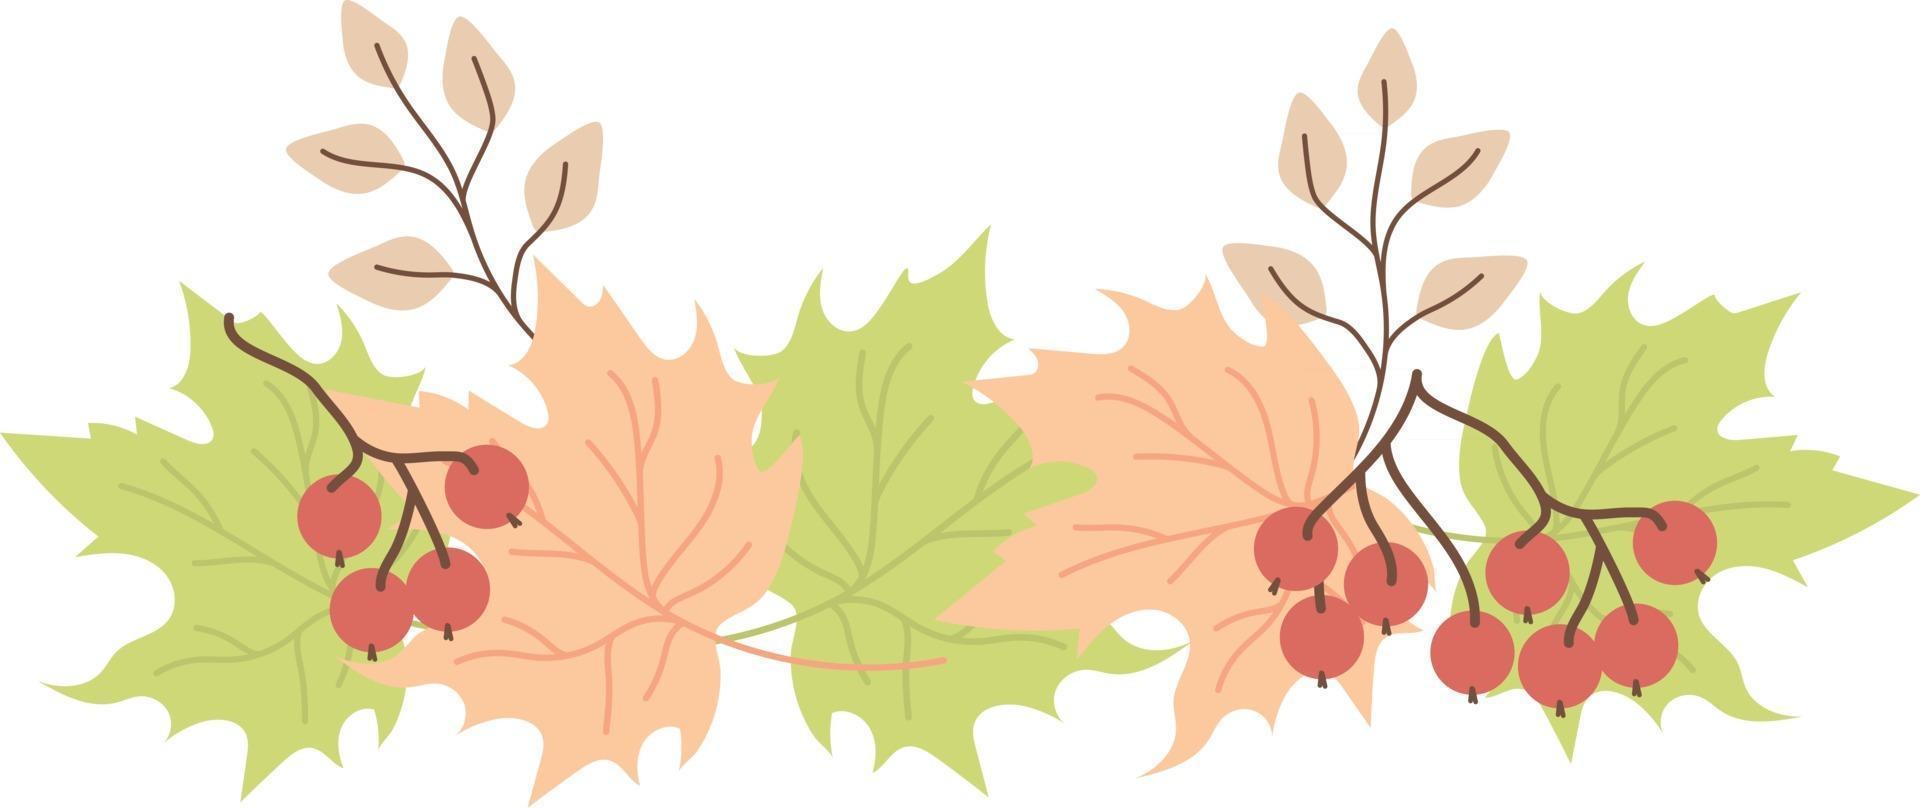 Horizontal Pattern of autumn leaves vector